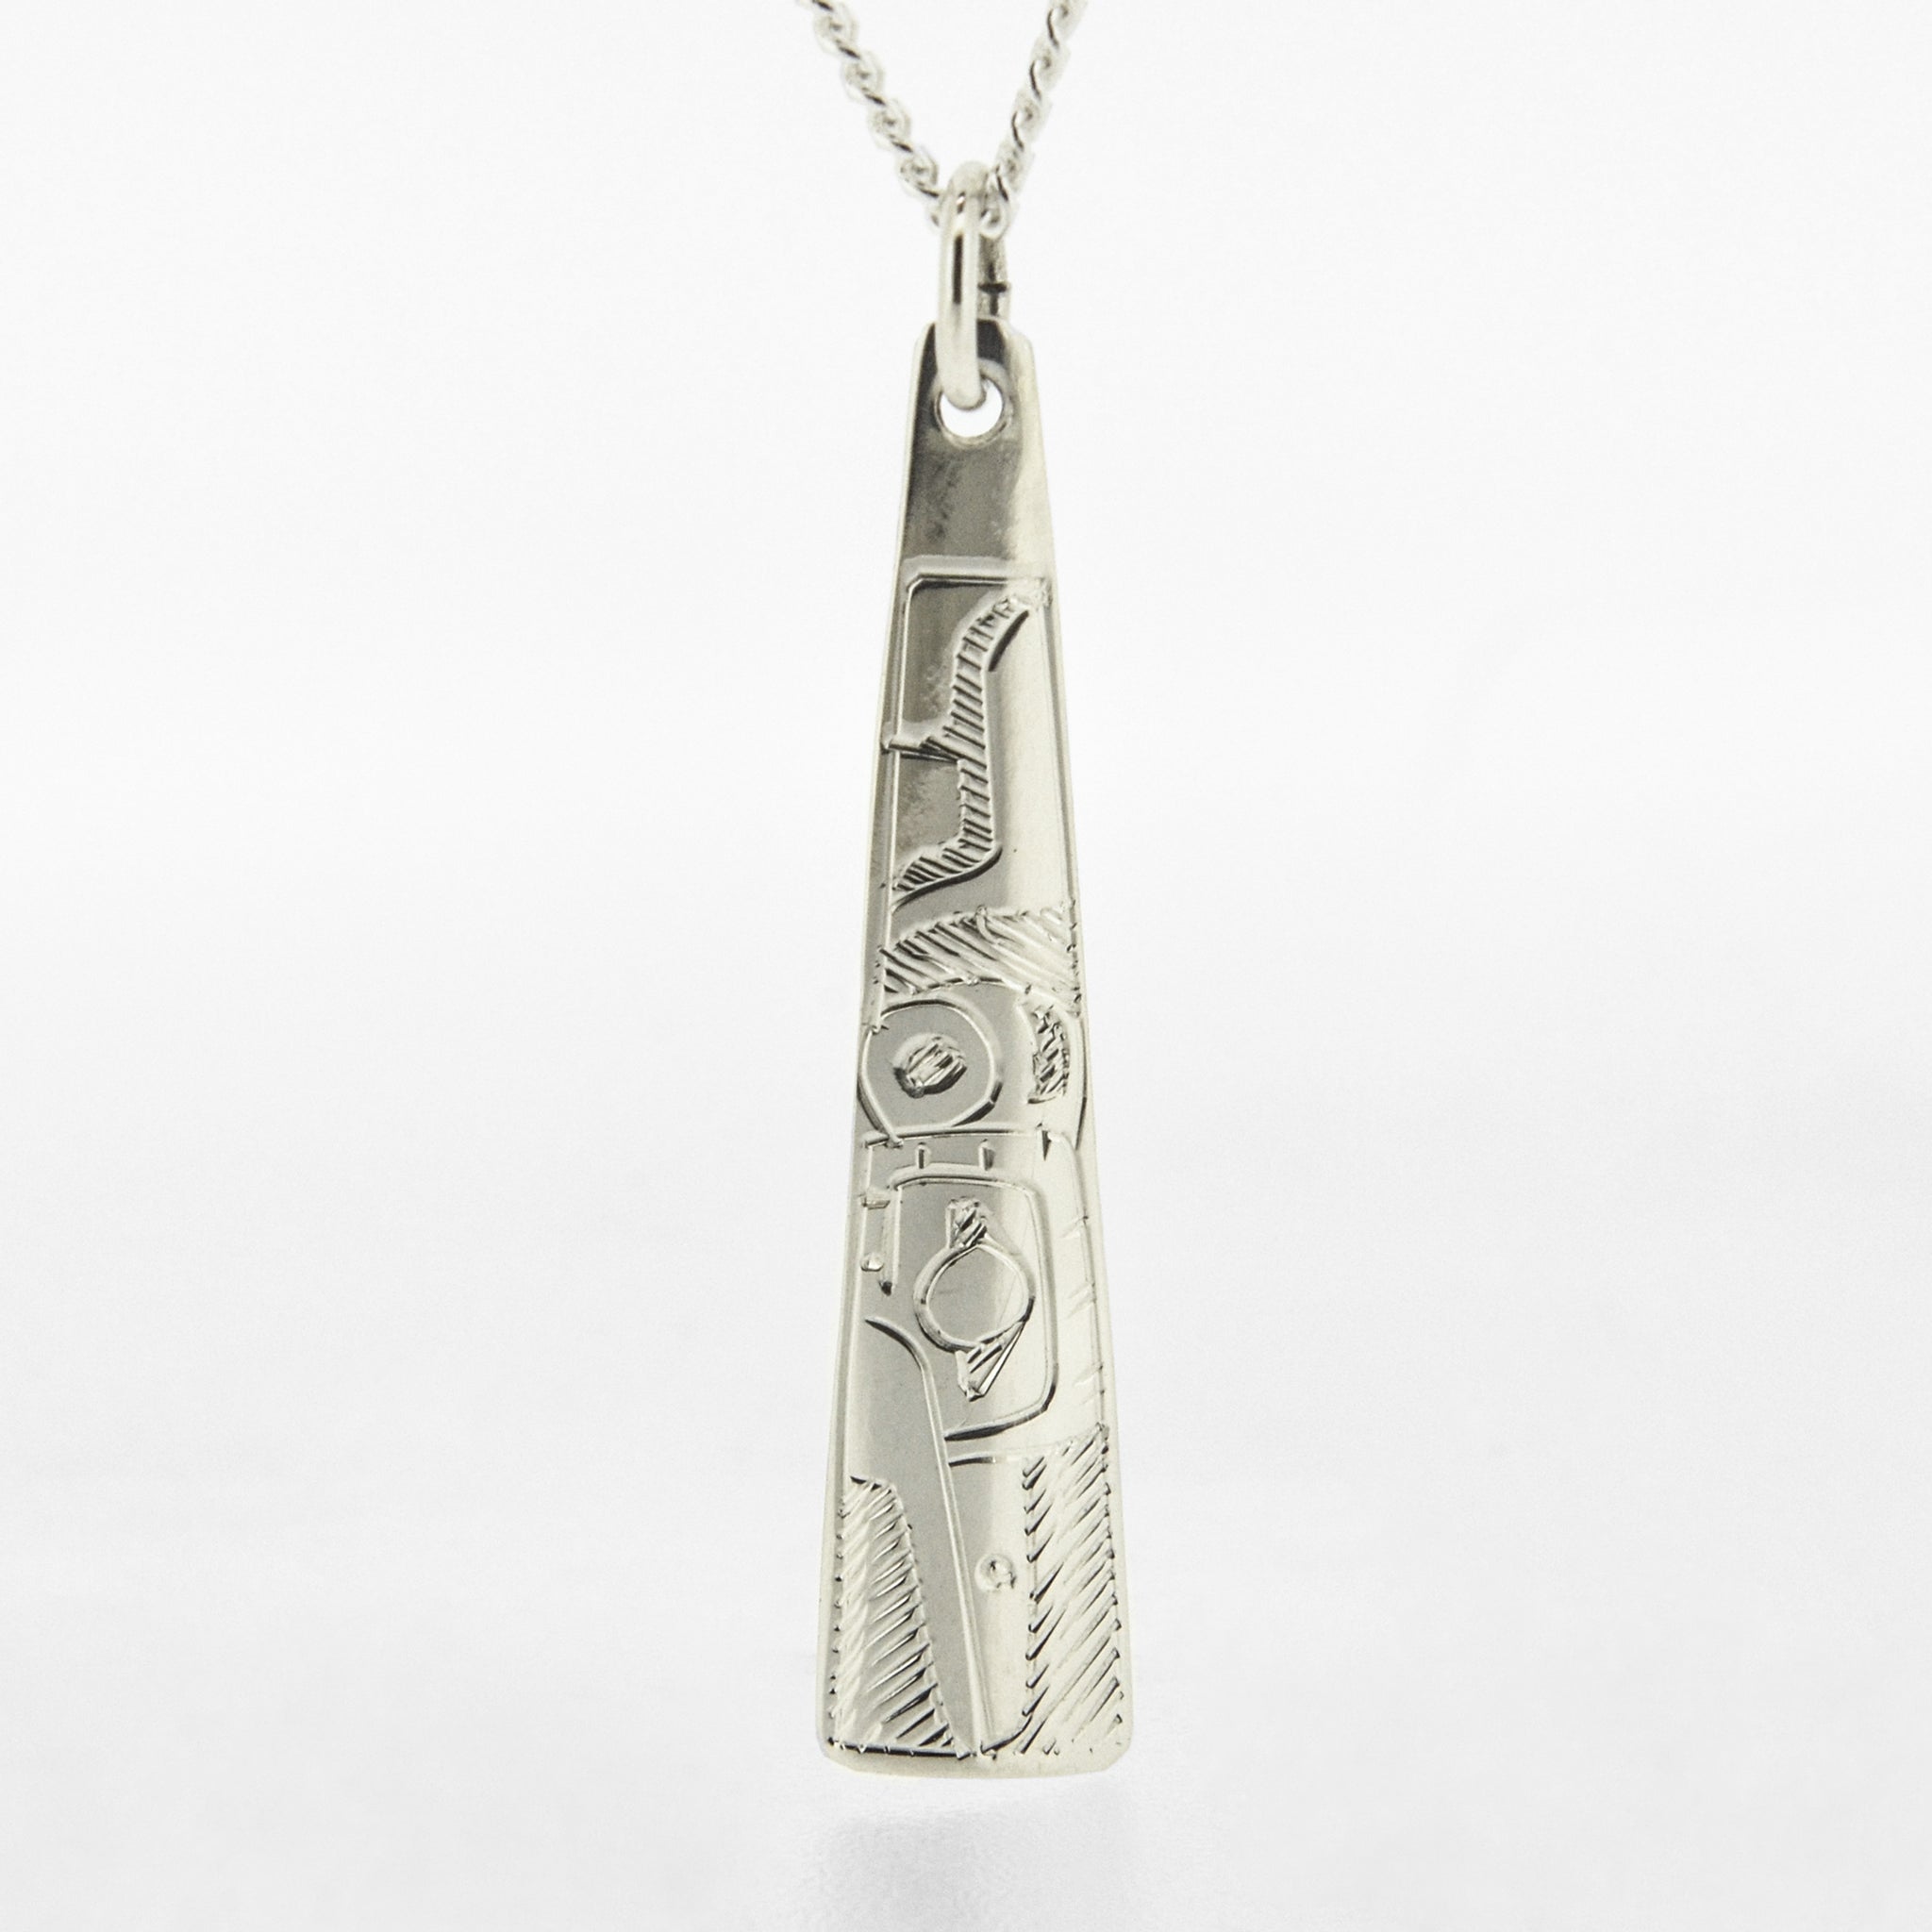 Sterling Silver Triangle Pendant | Hummingbird by Gilbert Pat